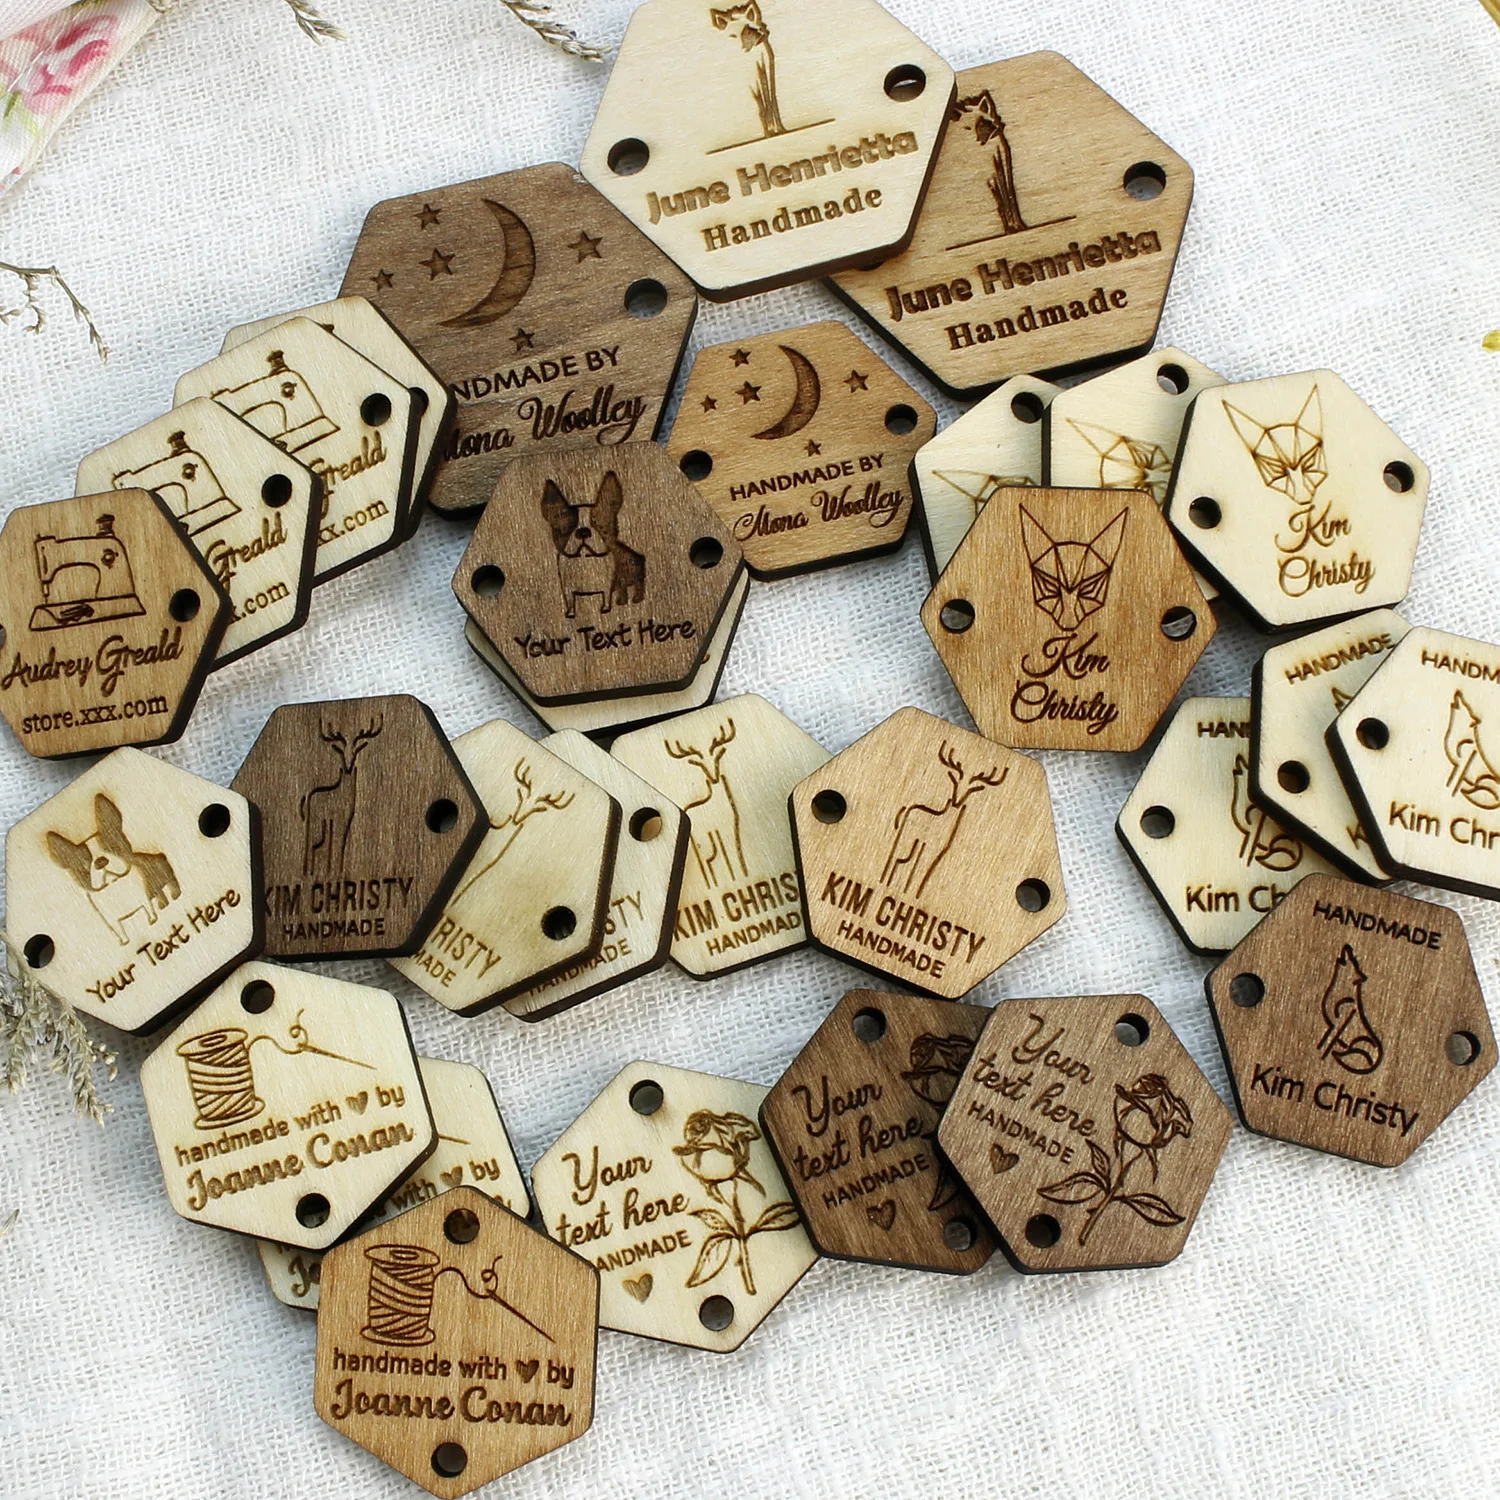 Hexagon wood,Wooden buttons,Personalized,Custom wood,Wood Name tag,Gift tags,Laser engraved,DIY WOOD CRAFT,LABEL TAG,Crocheted